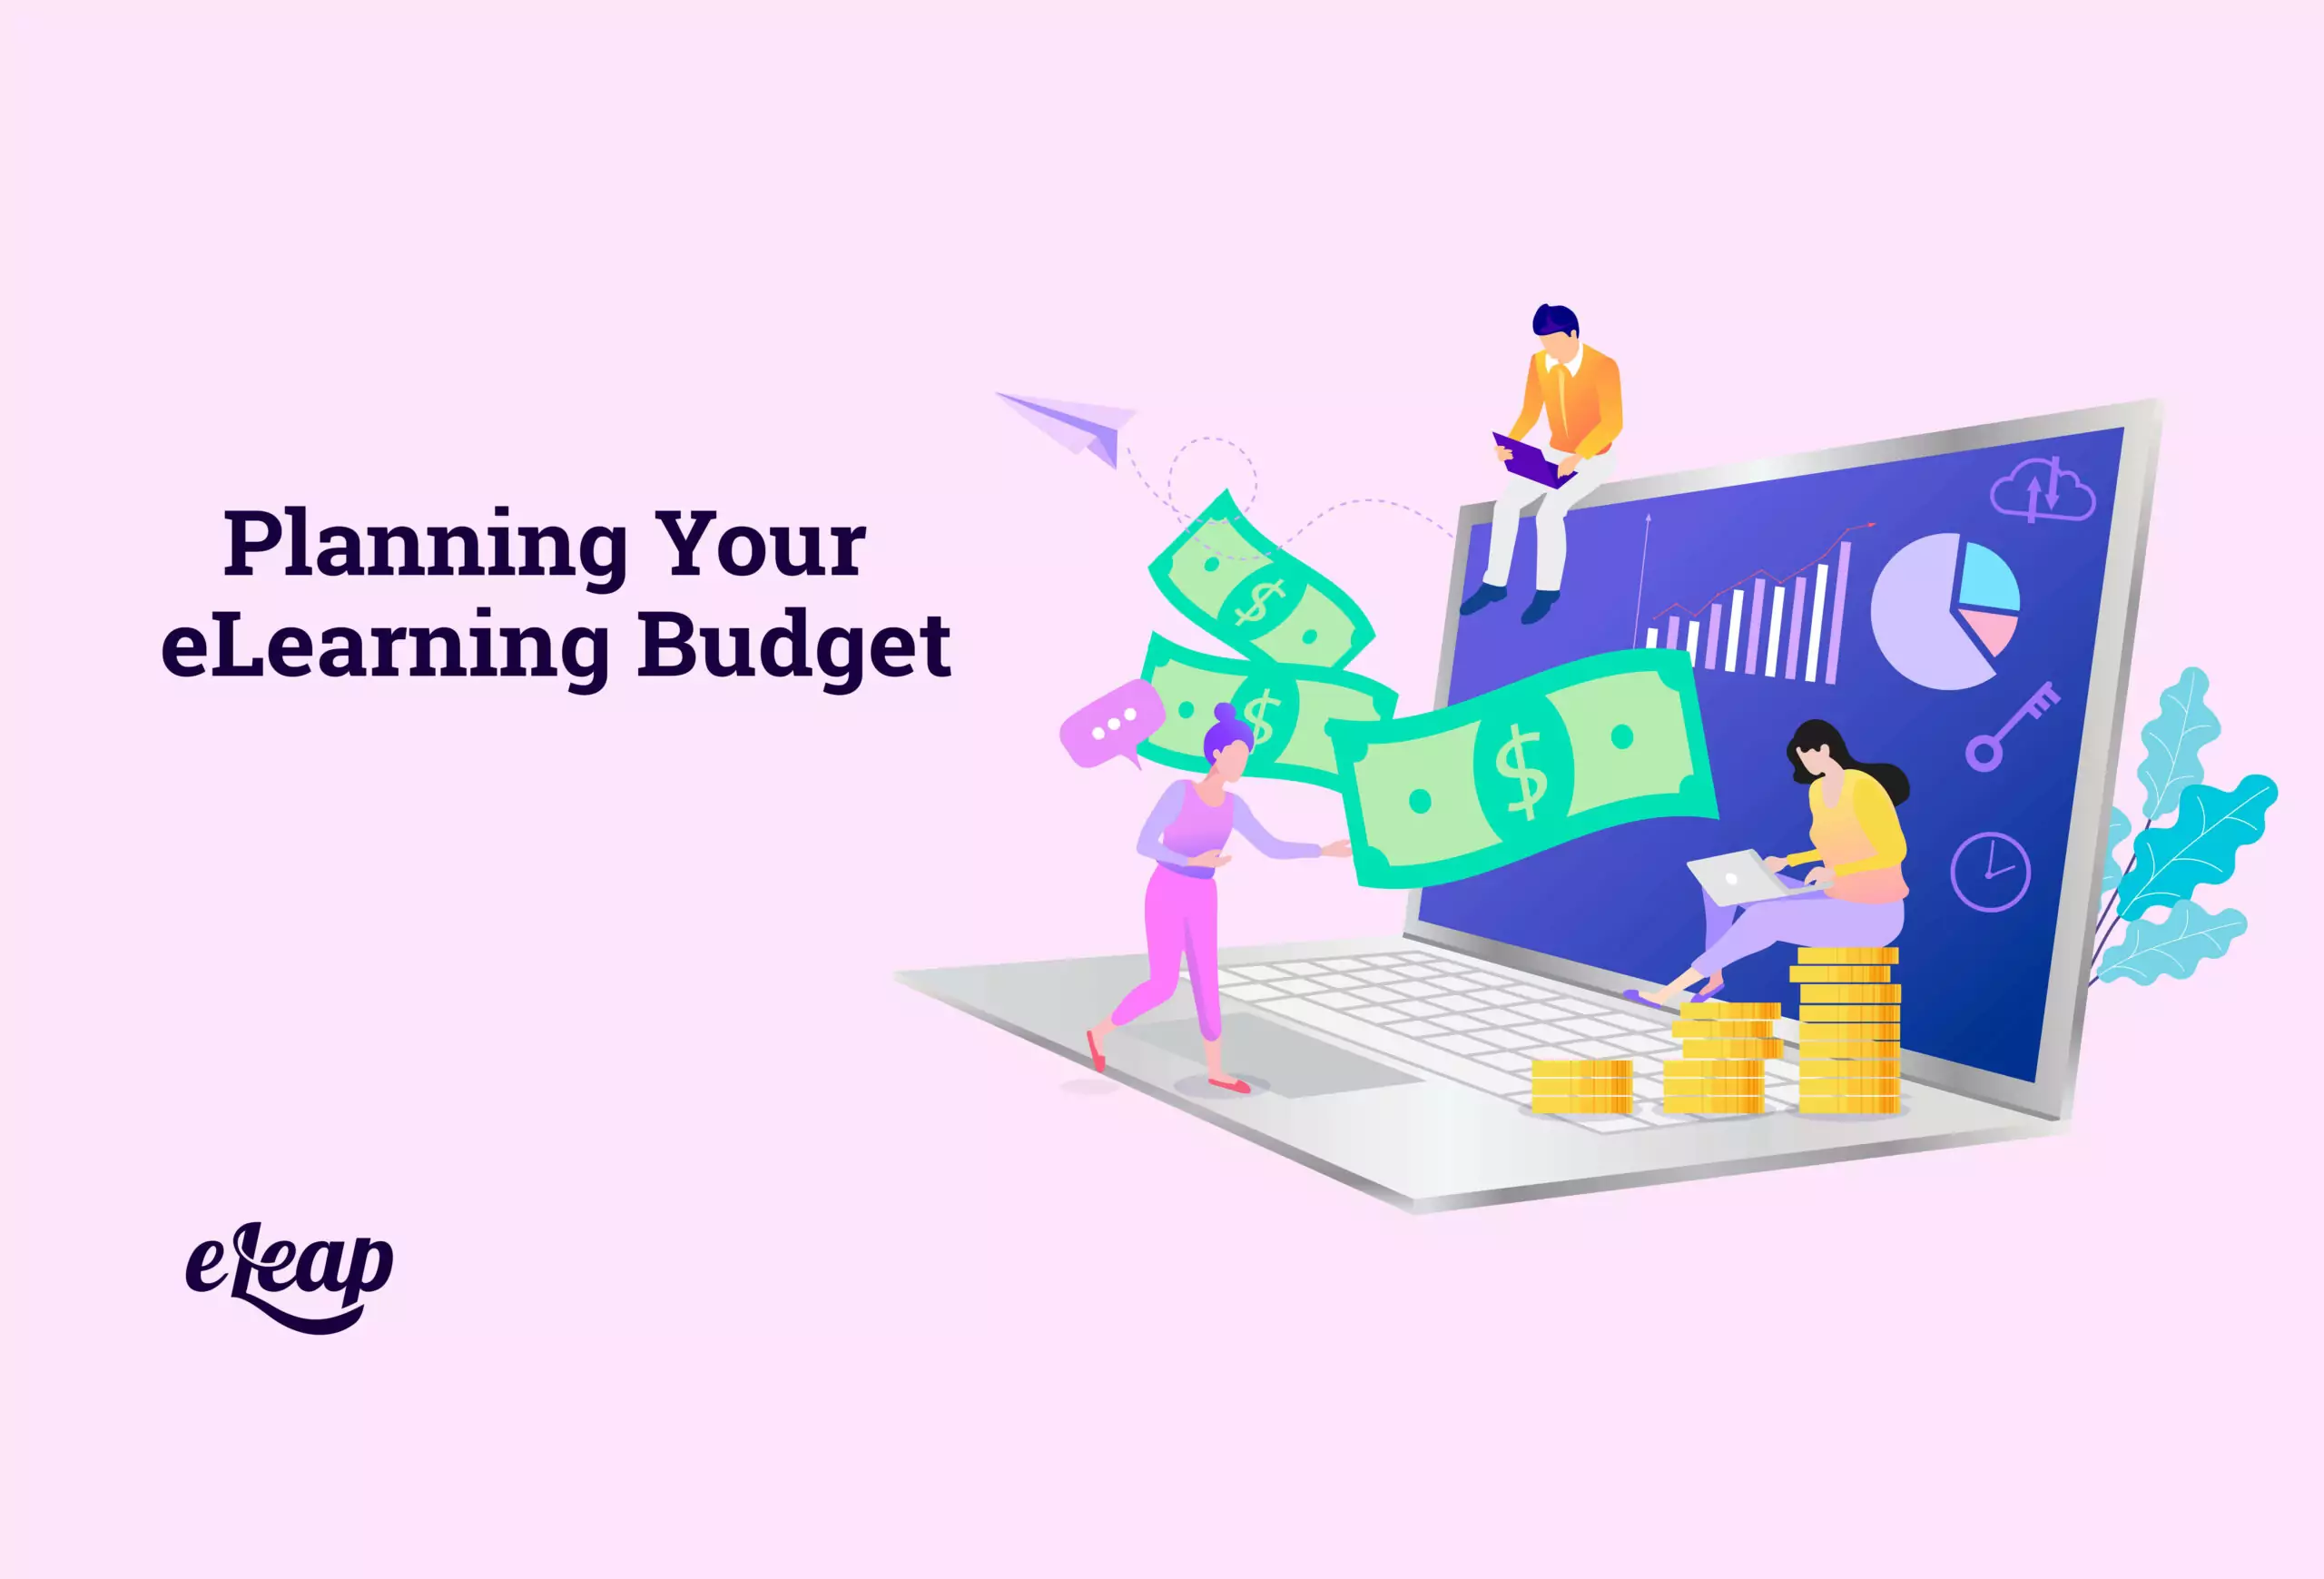 Planning Your eLearning Budget